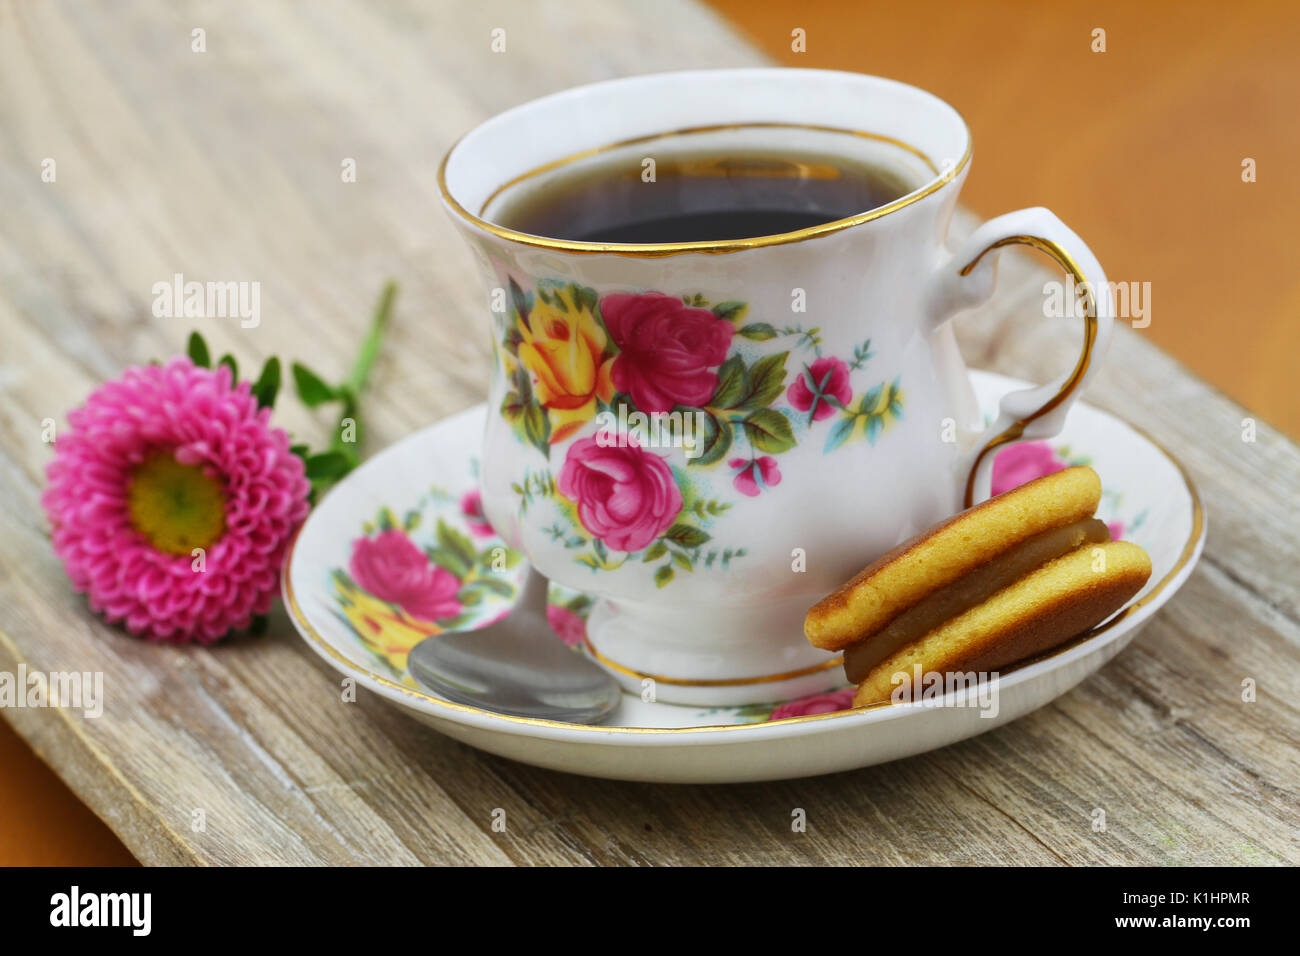 Cup of black tea in vintage porcelain cup with Japanese cookie and daisy flower Stock Photo